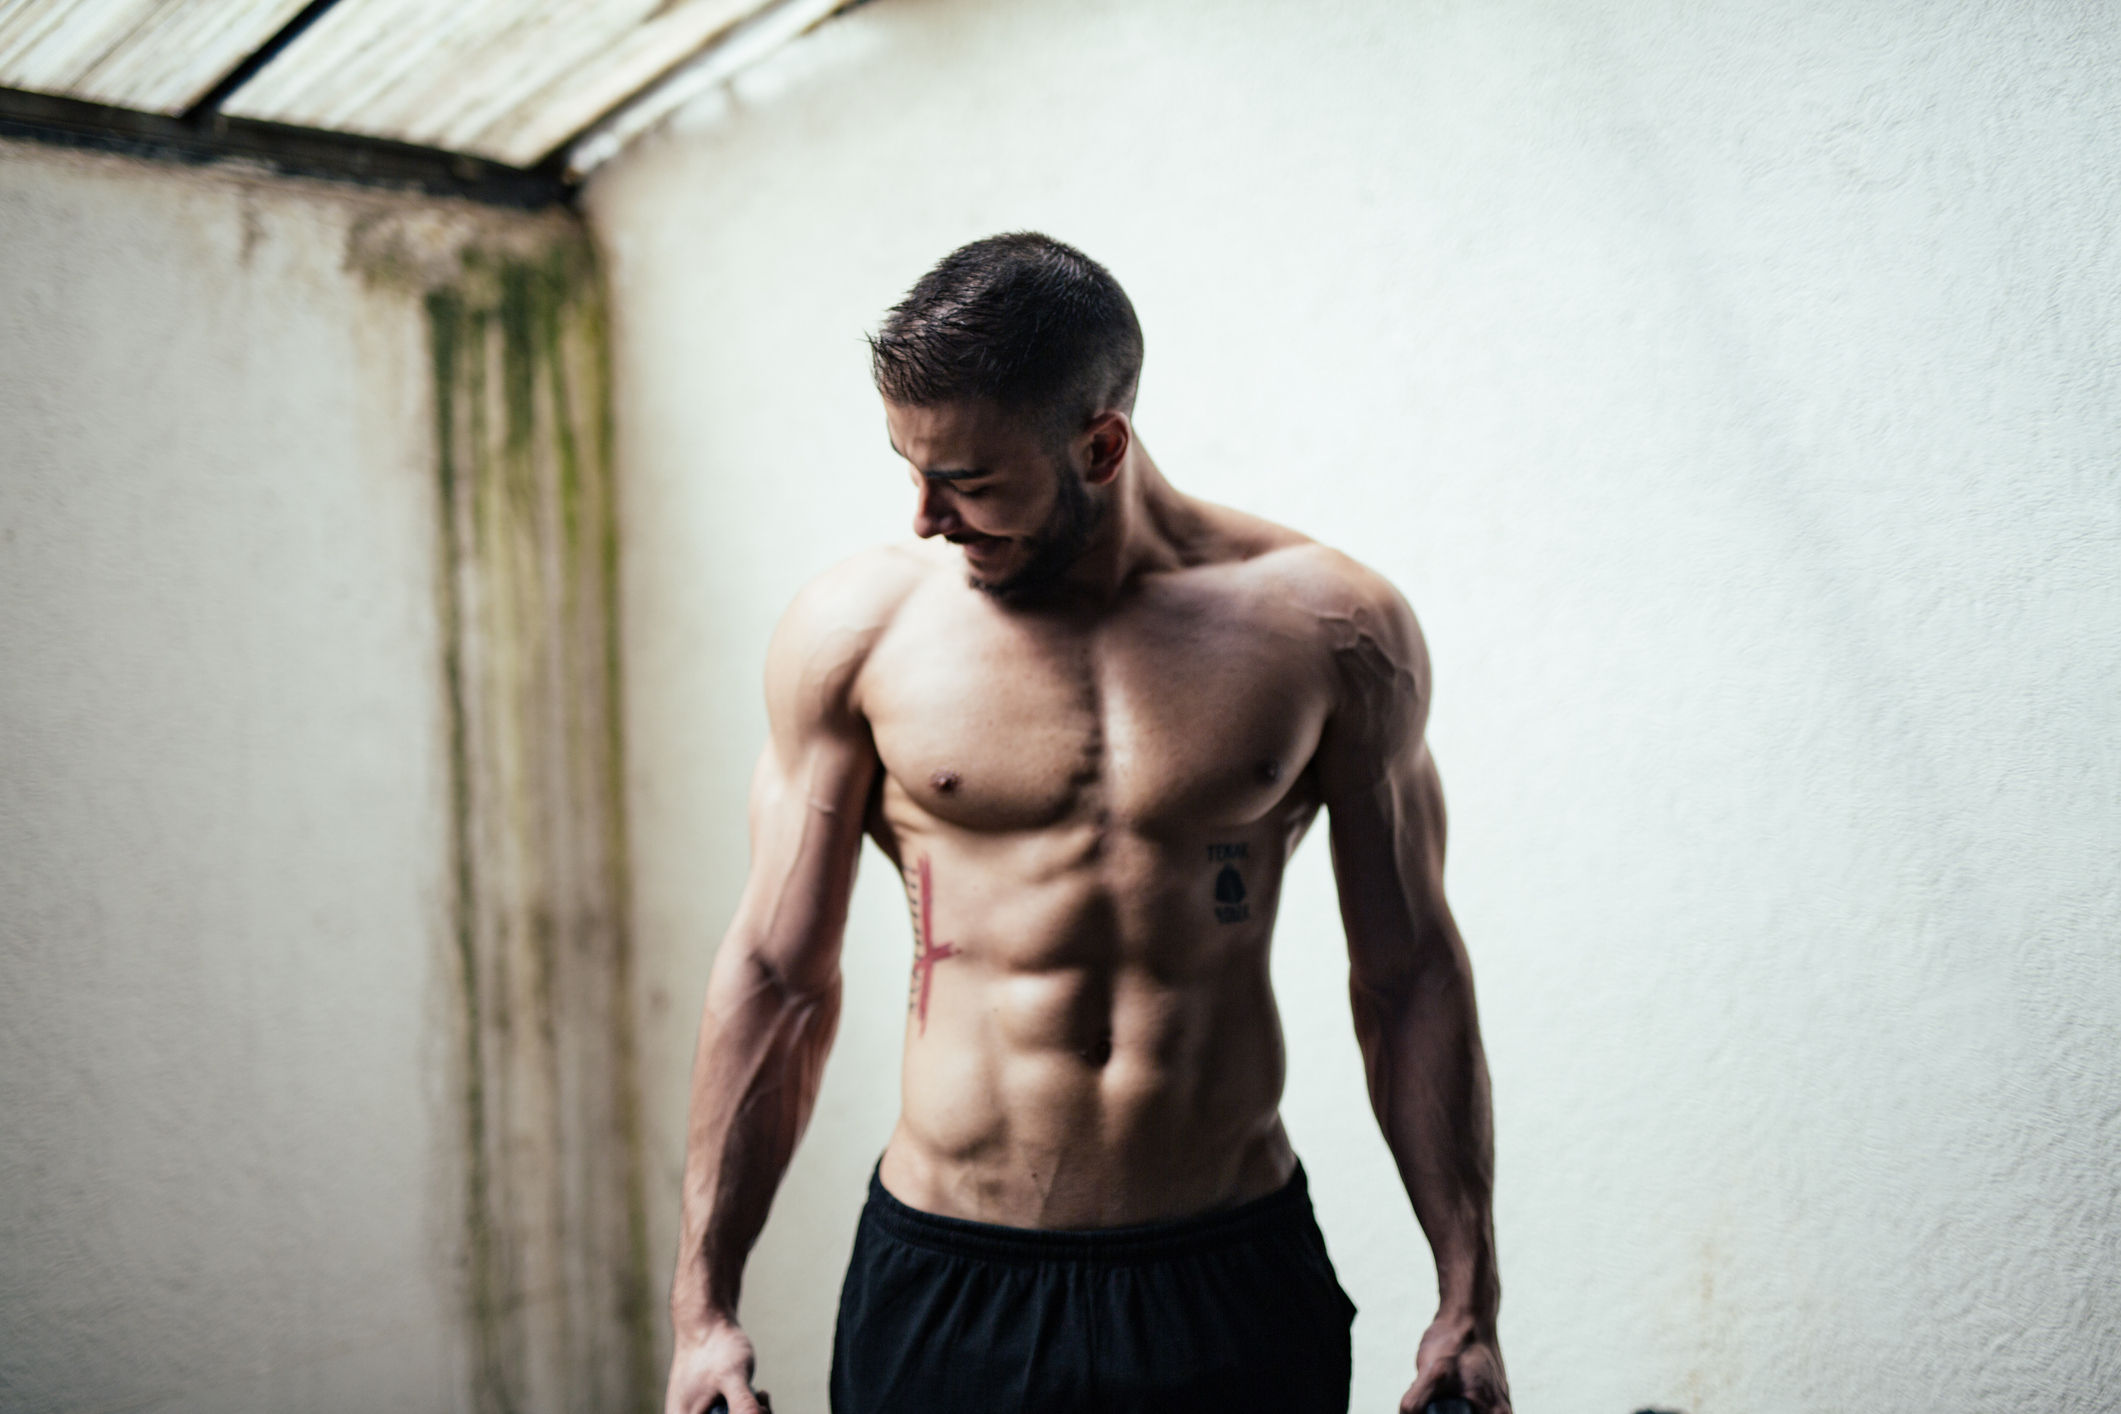 These breathing exercises can help you build six pack abs (Well, kind of)